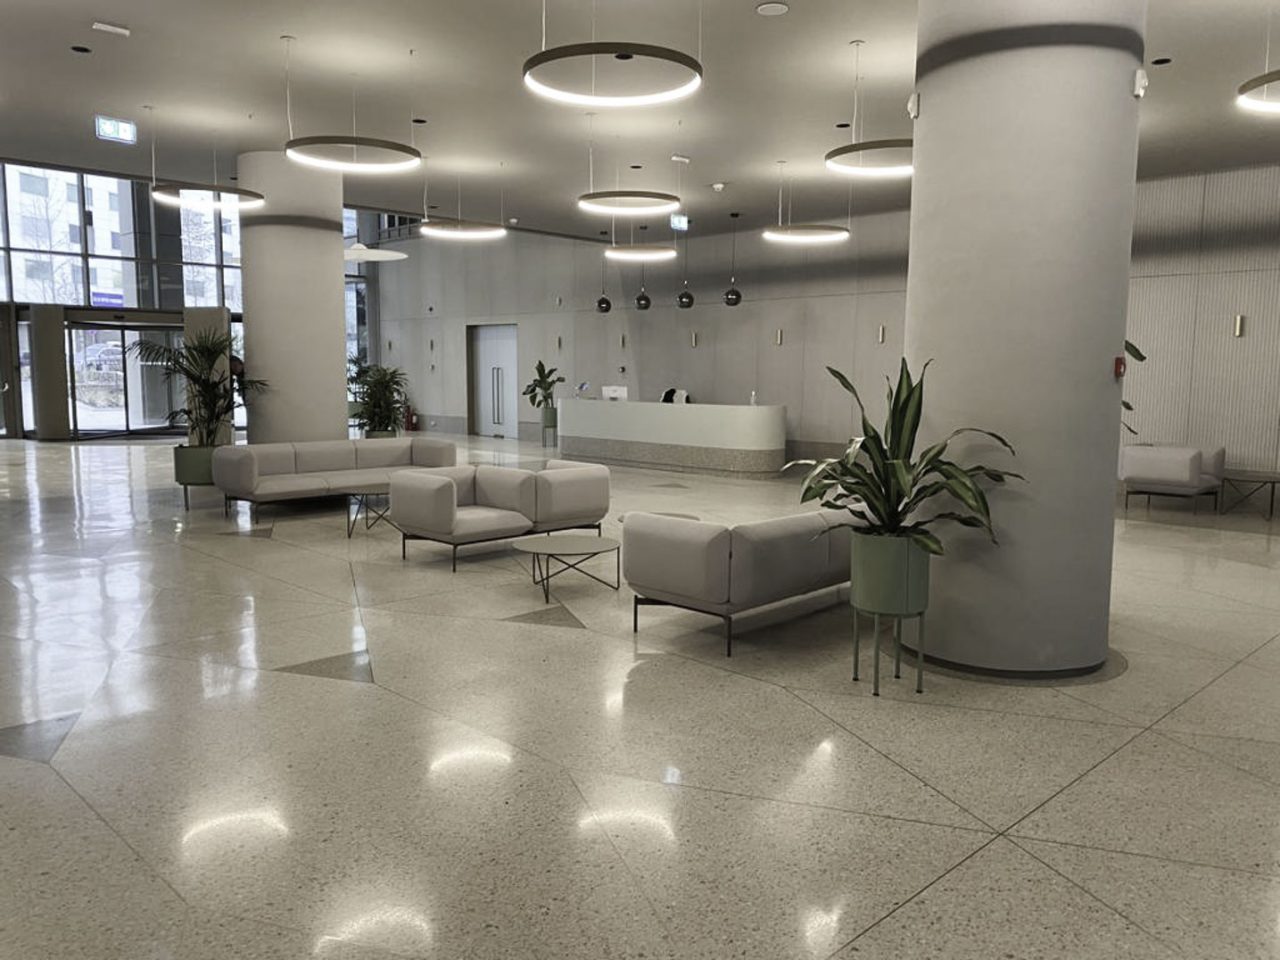 terrazzo flooring at the tandem office building